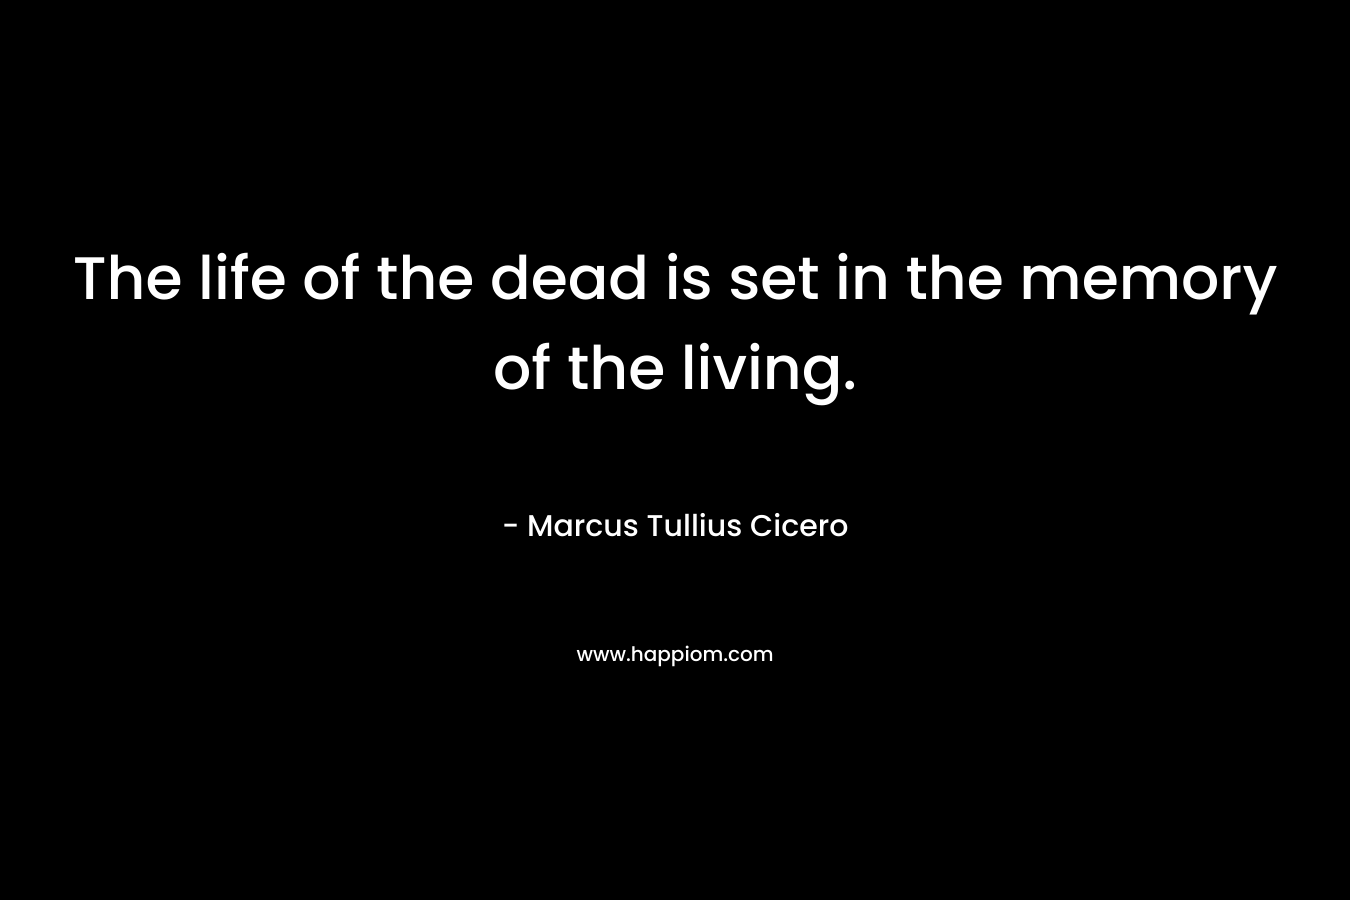 The life of the dead is set in the memory of the living.